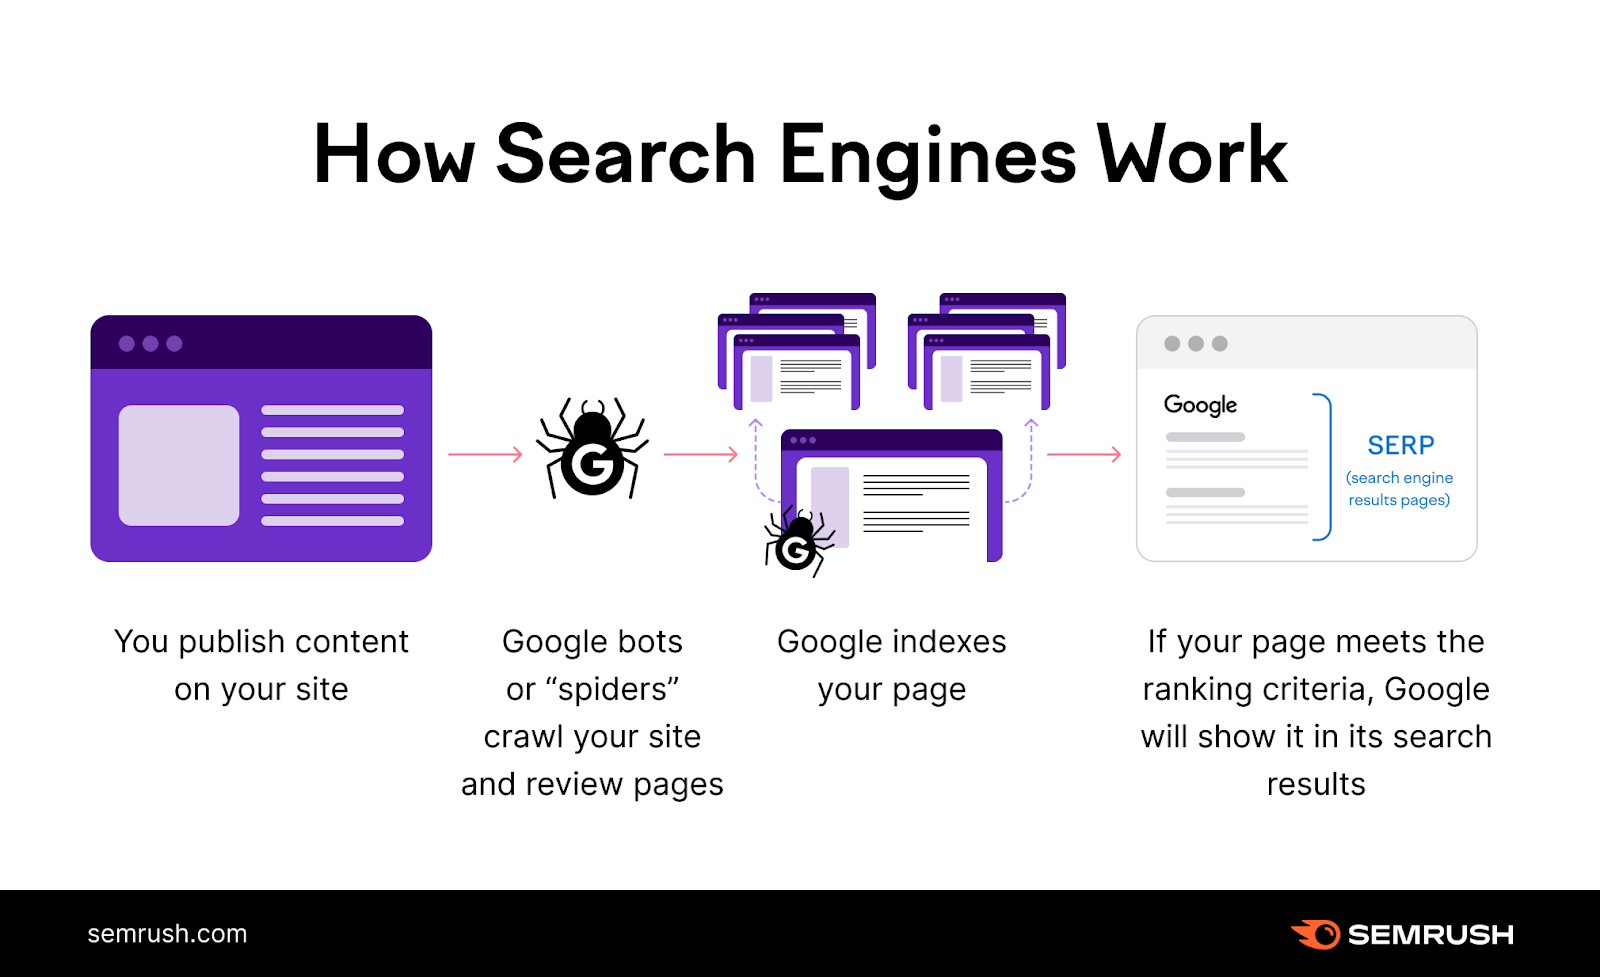 The illustration of how search engines work.